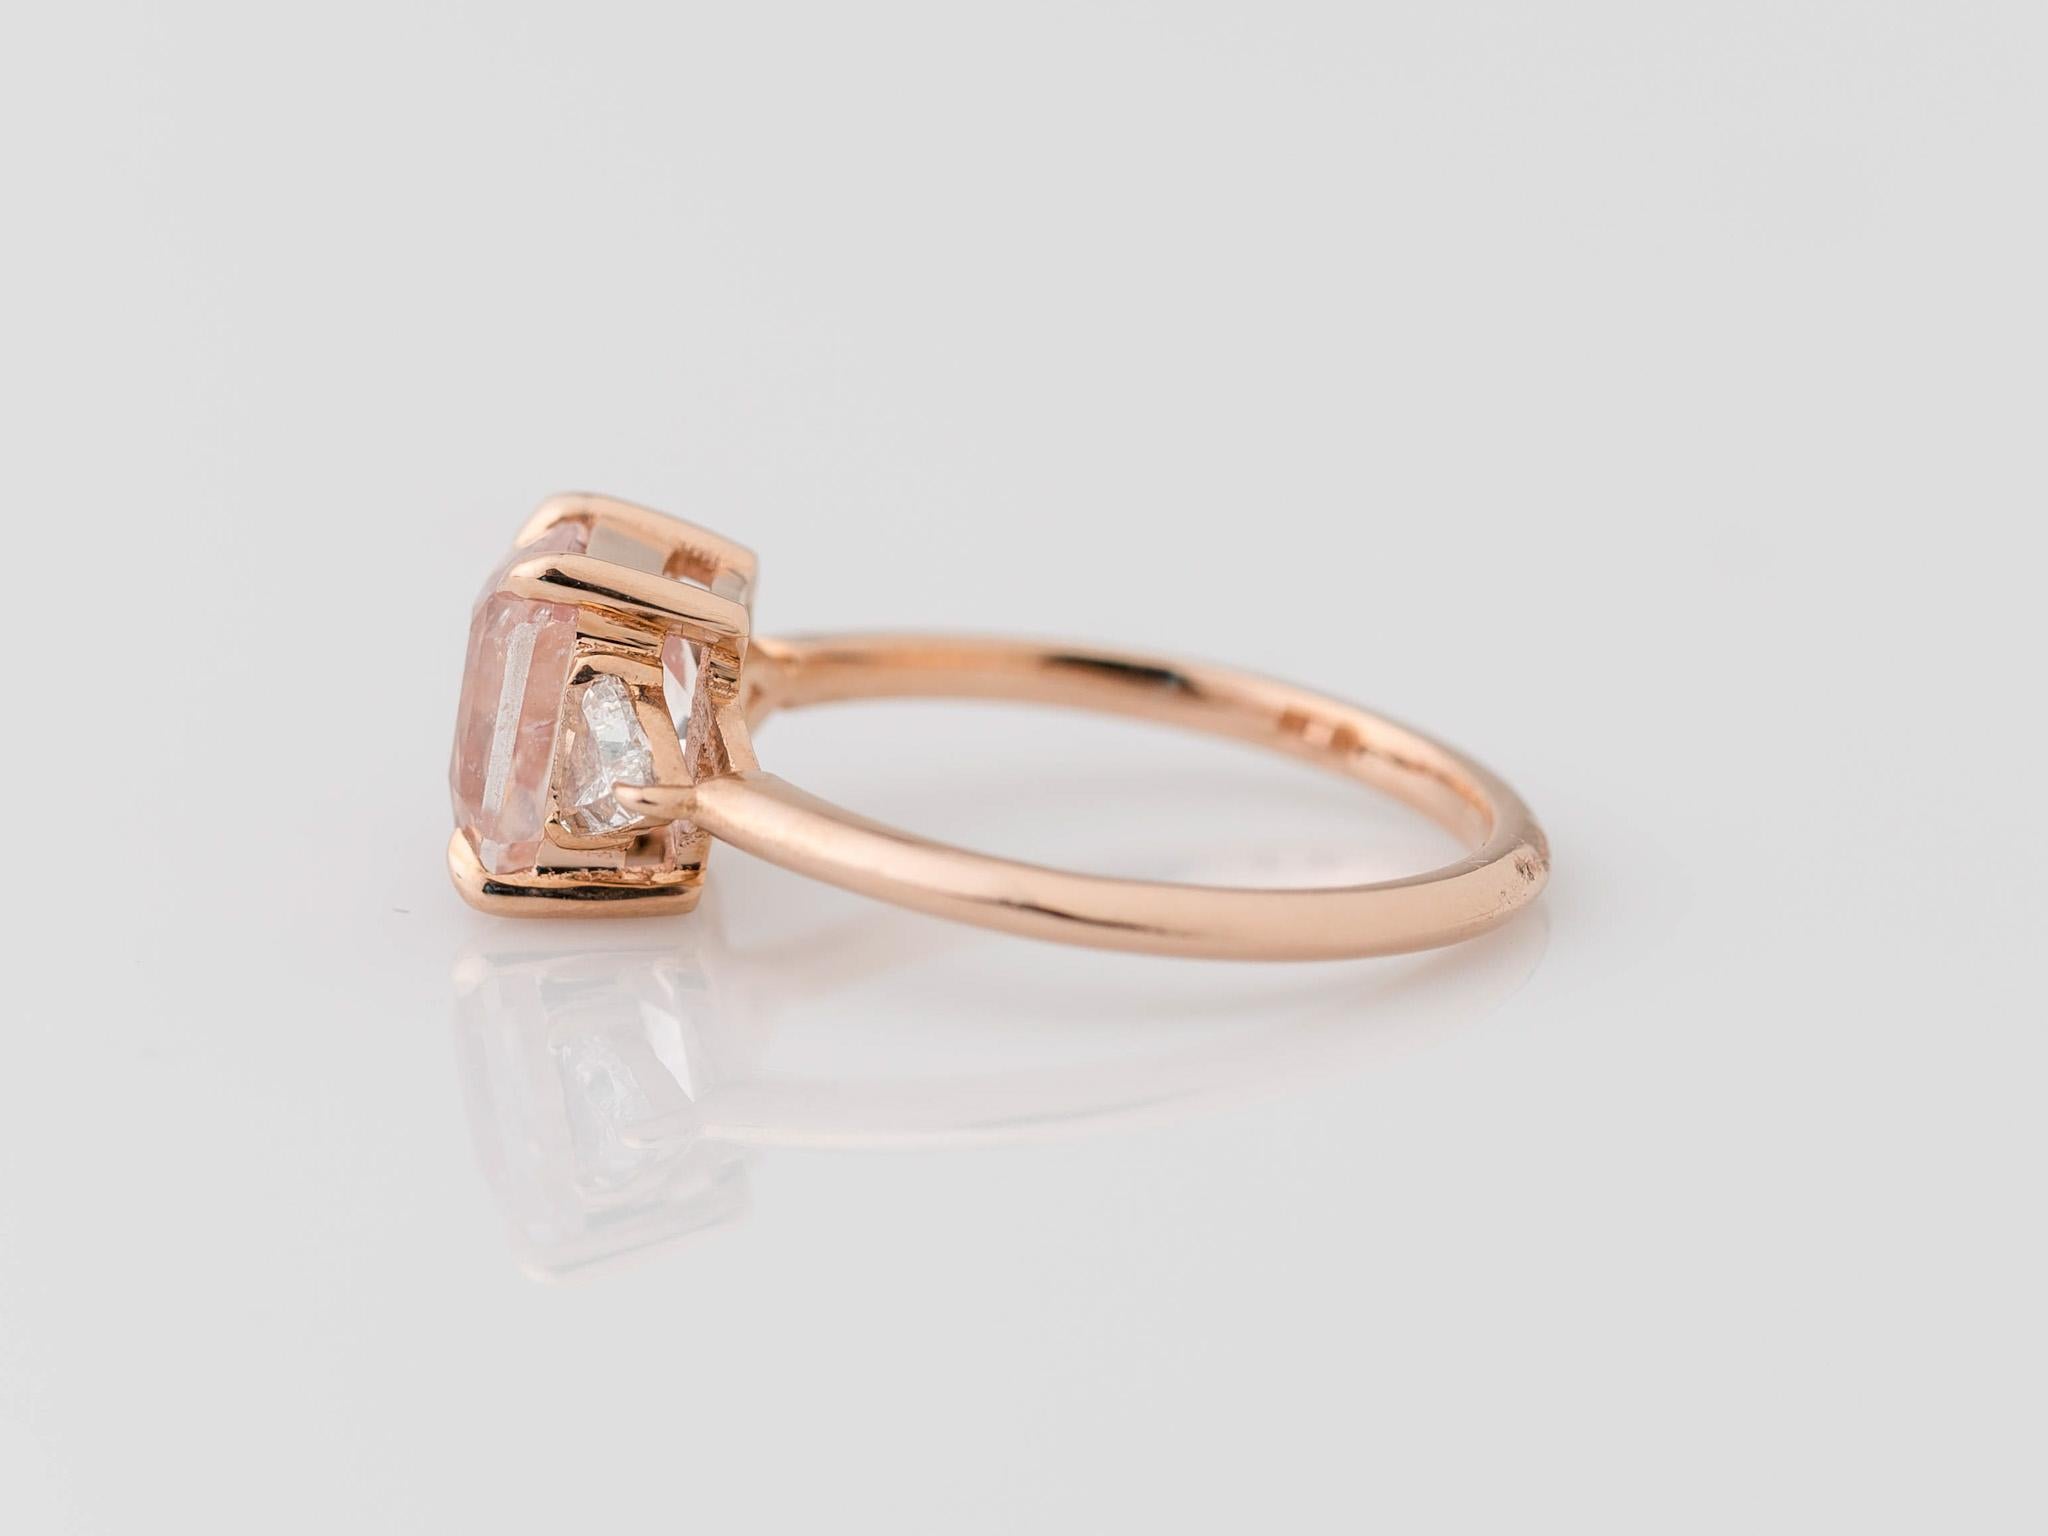 Embrace the allure of rarity with our exquisite 14K Rose Gold 3-Stone GIA Certified Padparadscha Sapphire Ring. The centerpiece, an ultra-rare unheated and completely natural radiant-cut Padparadscha sapphire, weighing 2.34 carats and measuring